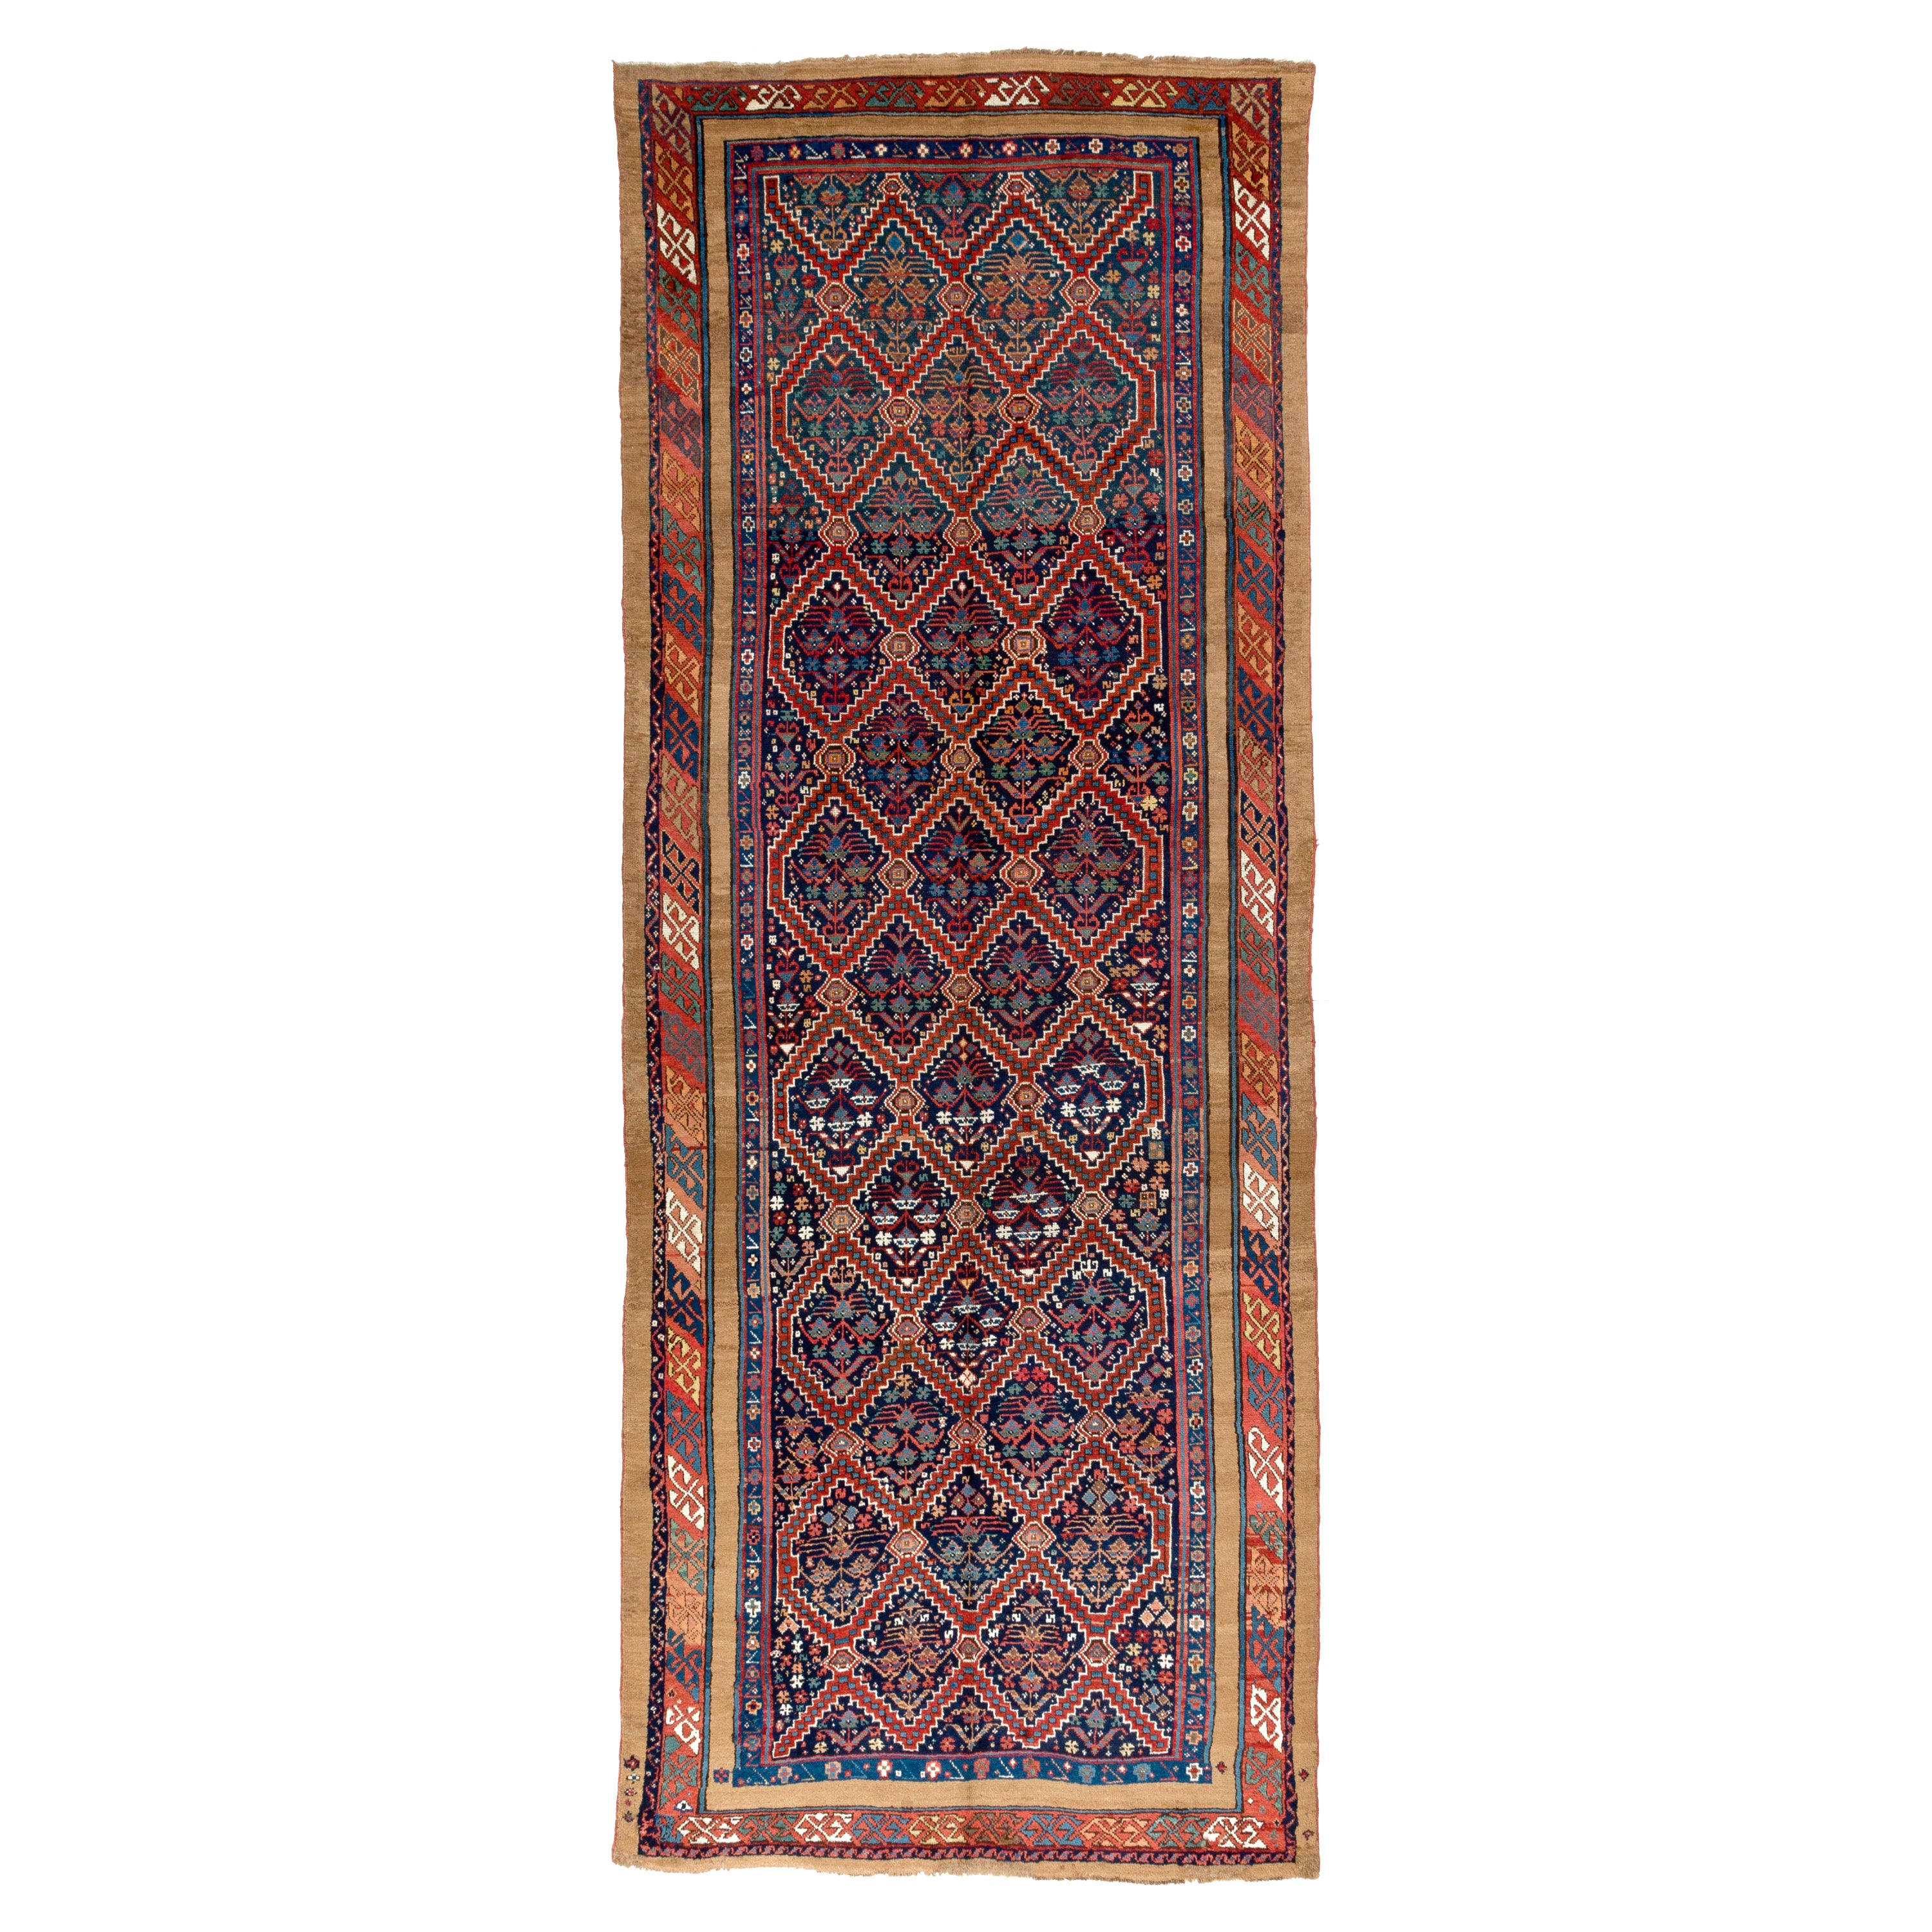 Antique Serab Runner, Northwest Persia, One-of-a-Kind Rug, CA 1875